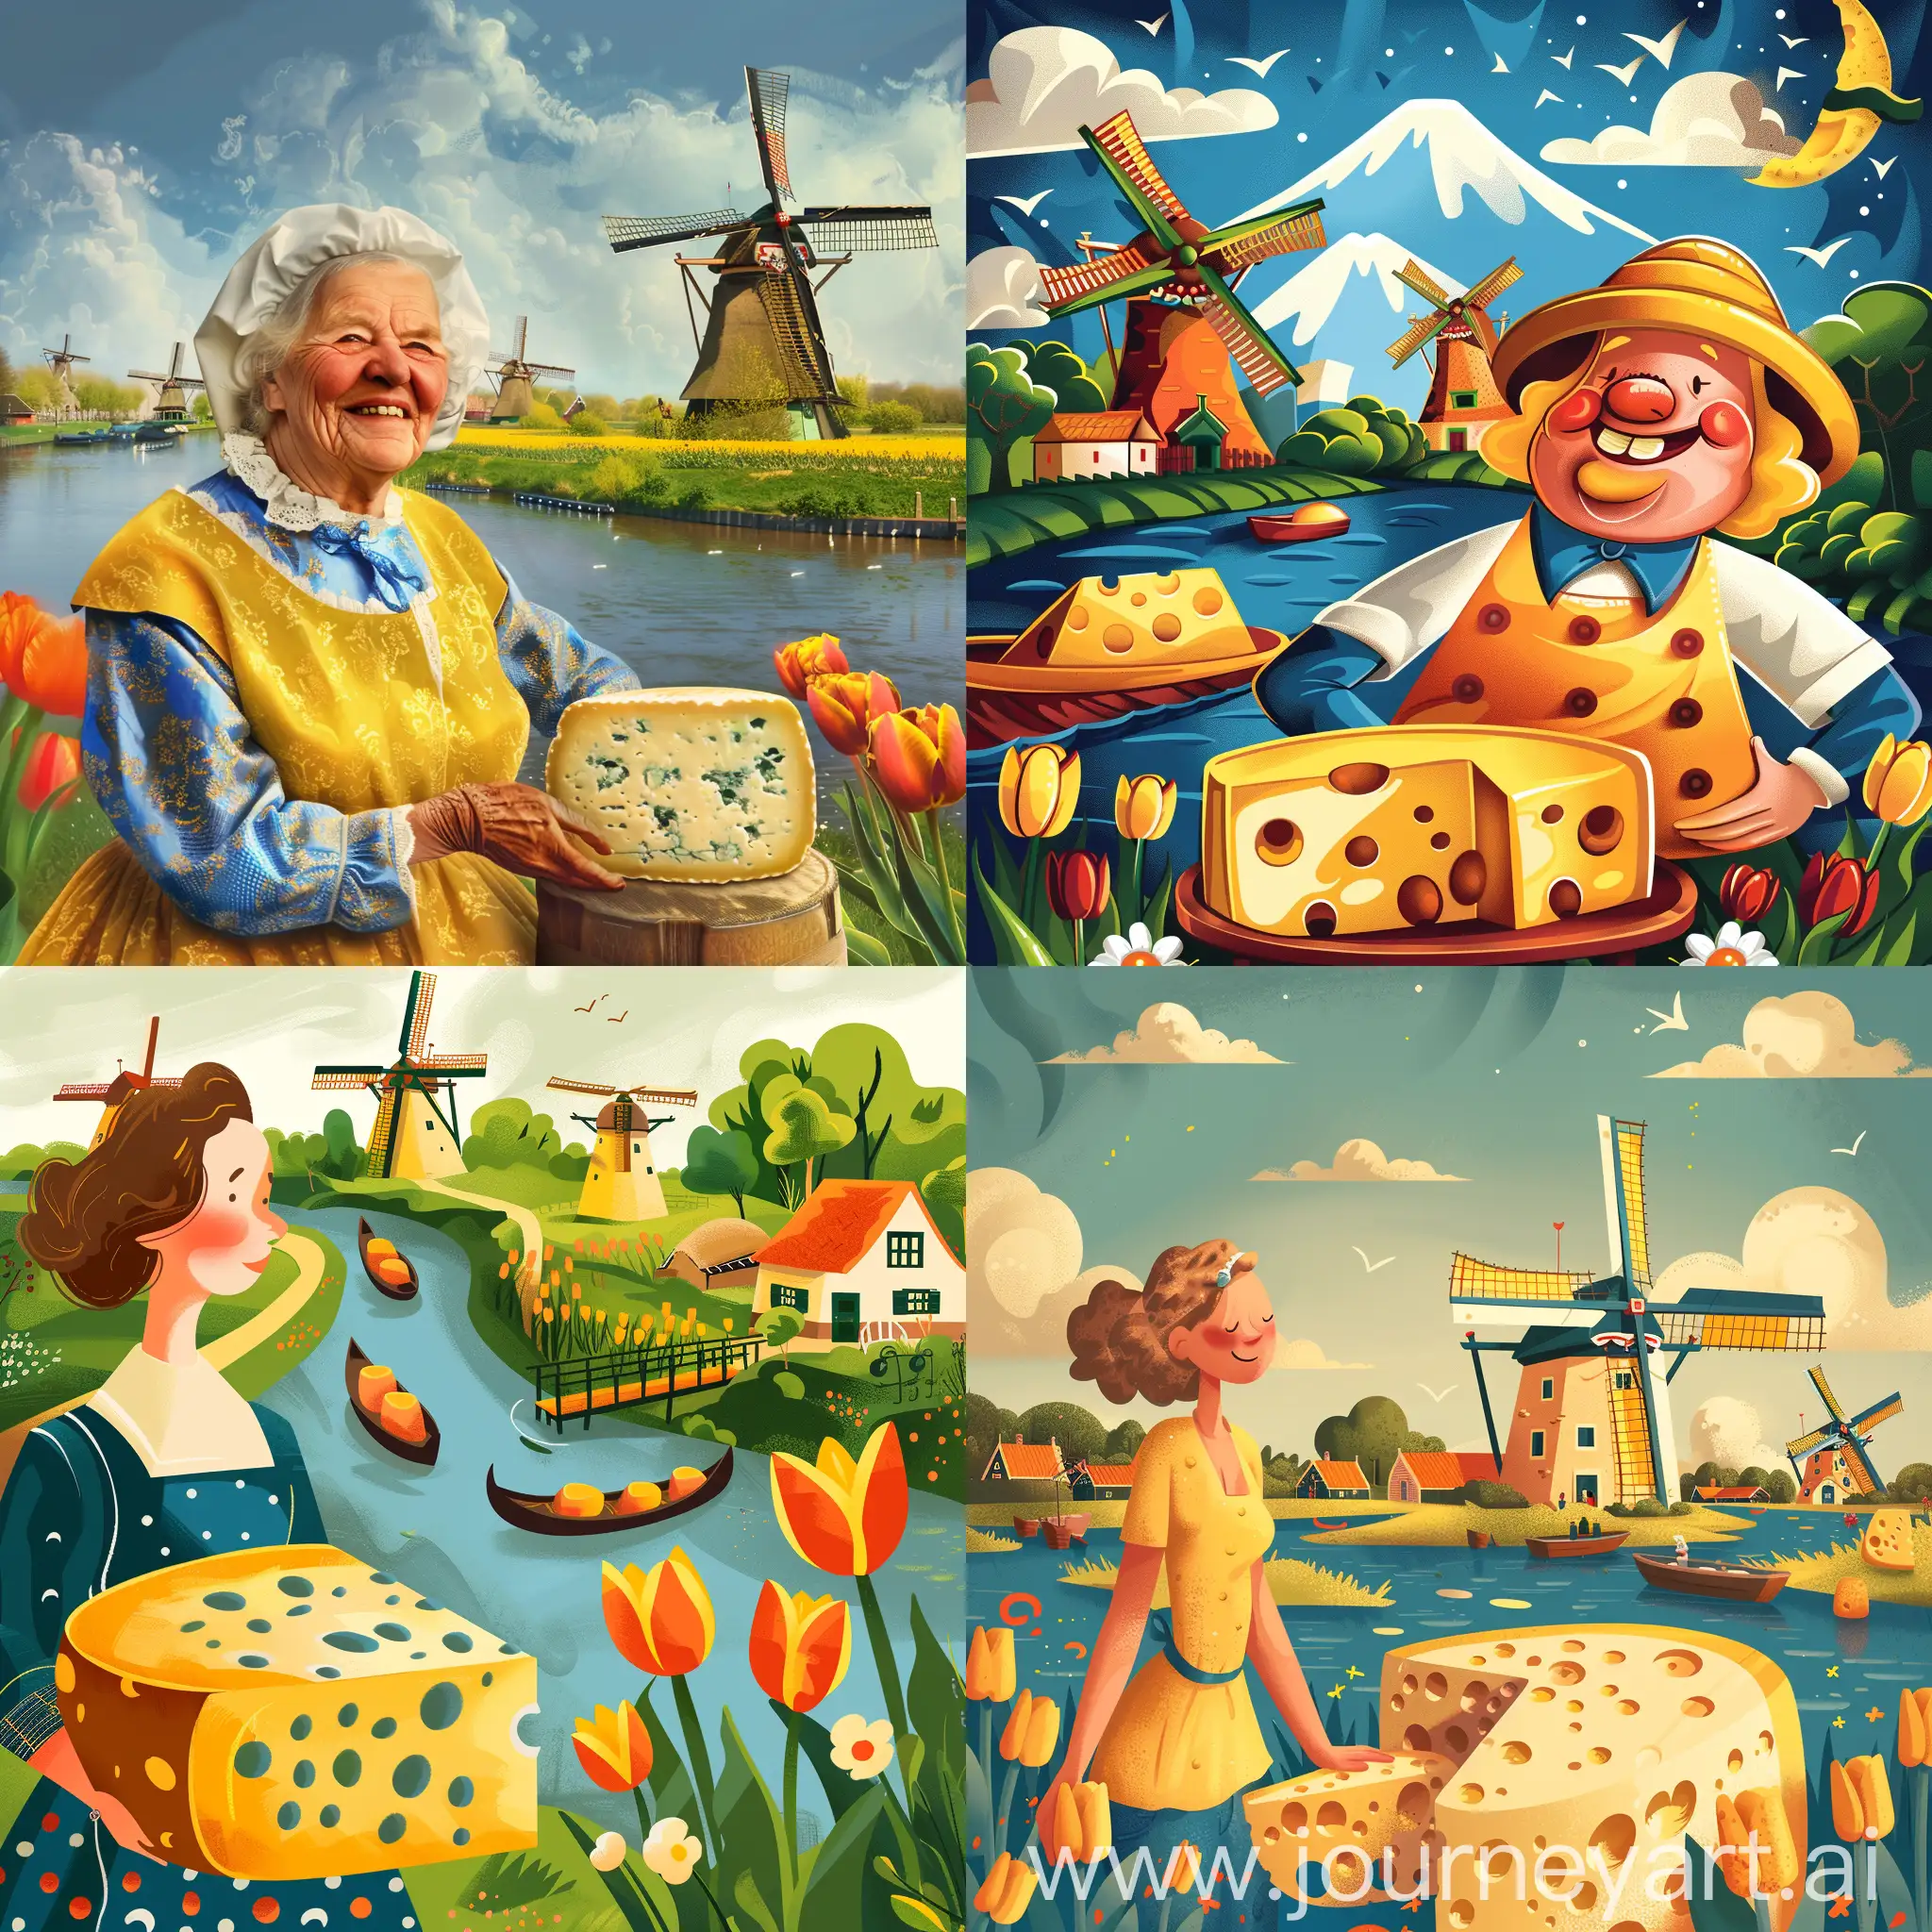 typical dutch person. Involve cheese, windmills, tulips and dutch canals